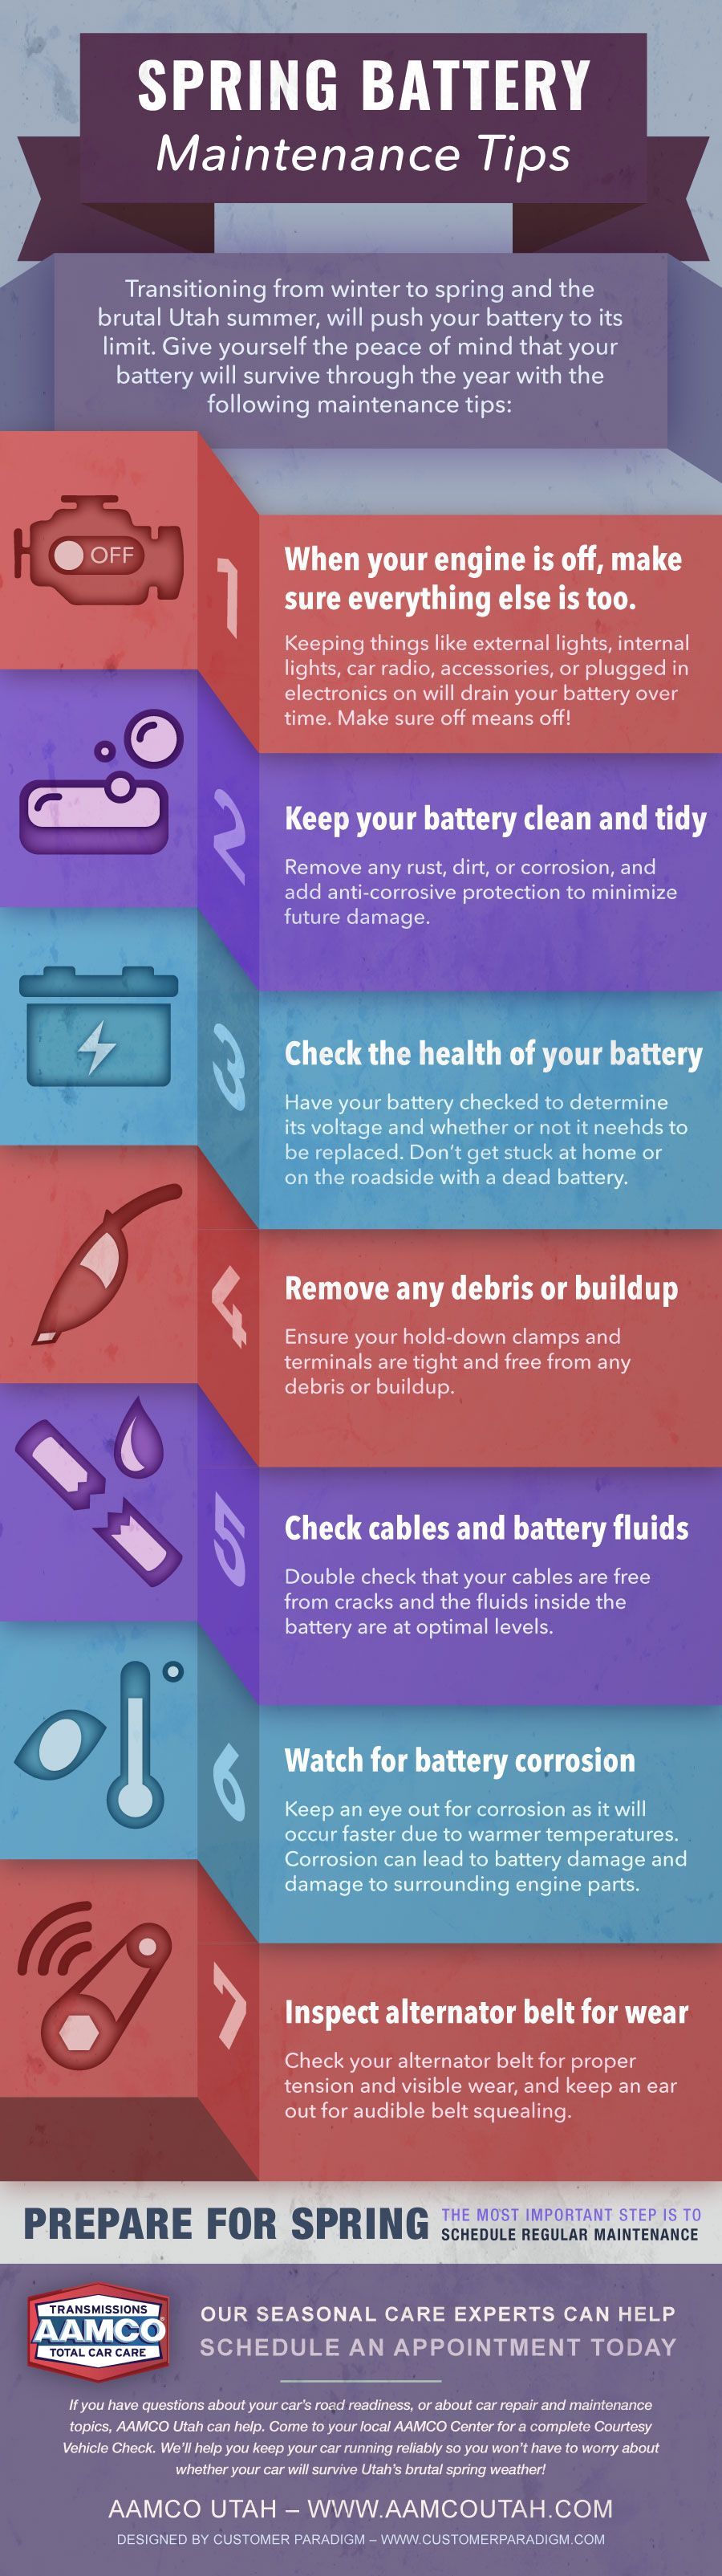 A graphic showing how to care for a spring battery